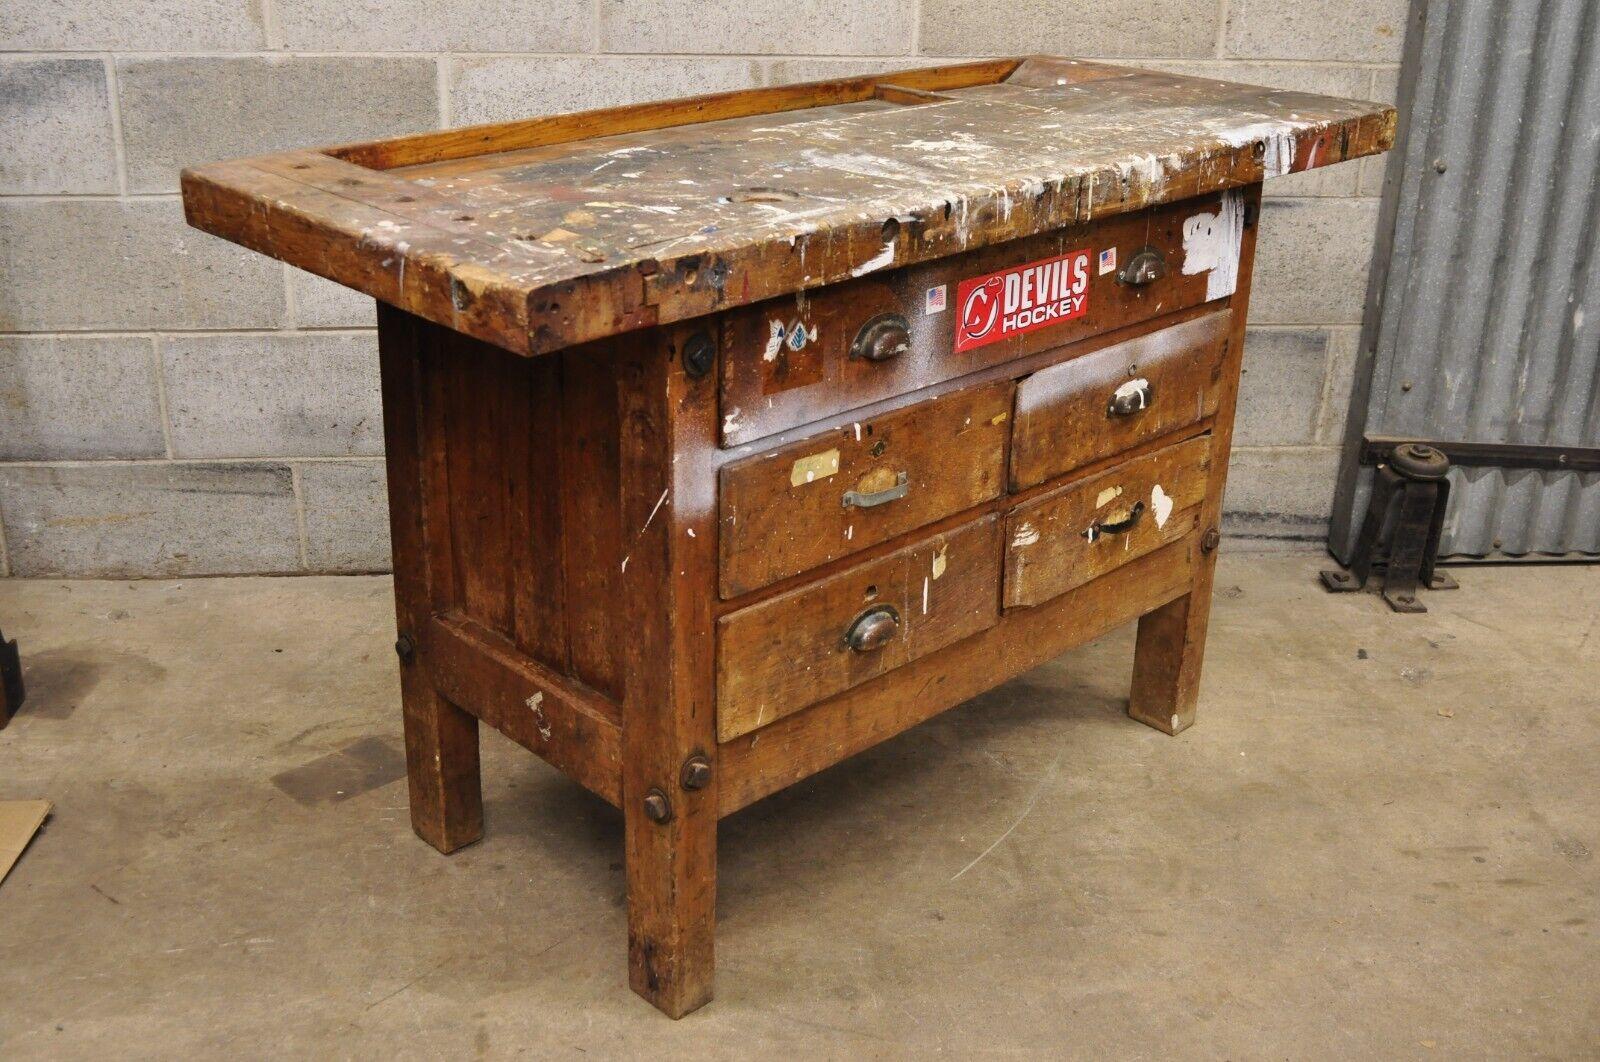 Antique American Industrial wood plank distress paint splatter work bench table. Item features a distressed finish with paint splatters, various metal handles, solid plank wood top with compartments, no key but unlocked, 5 drawers, very nice vintage